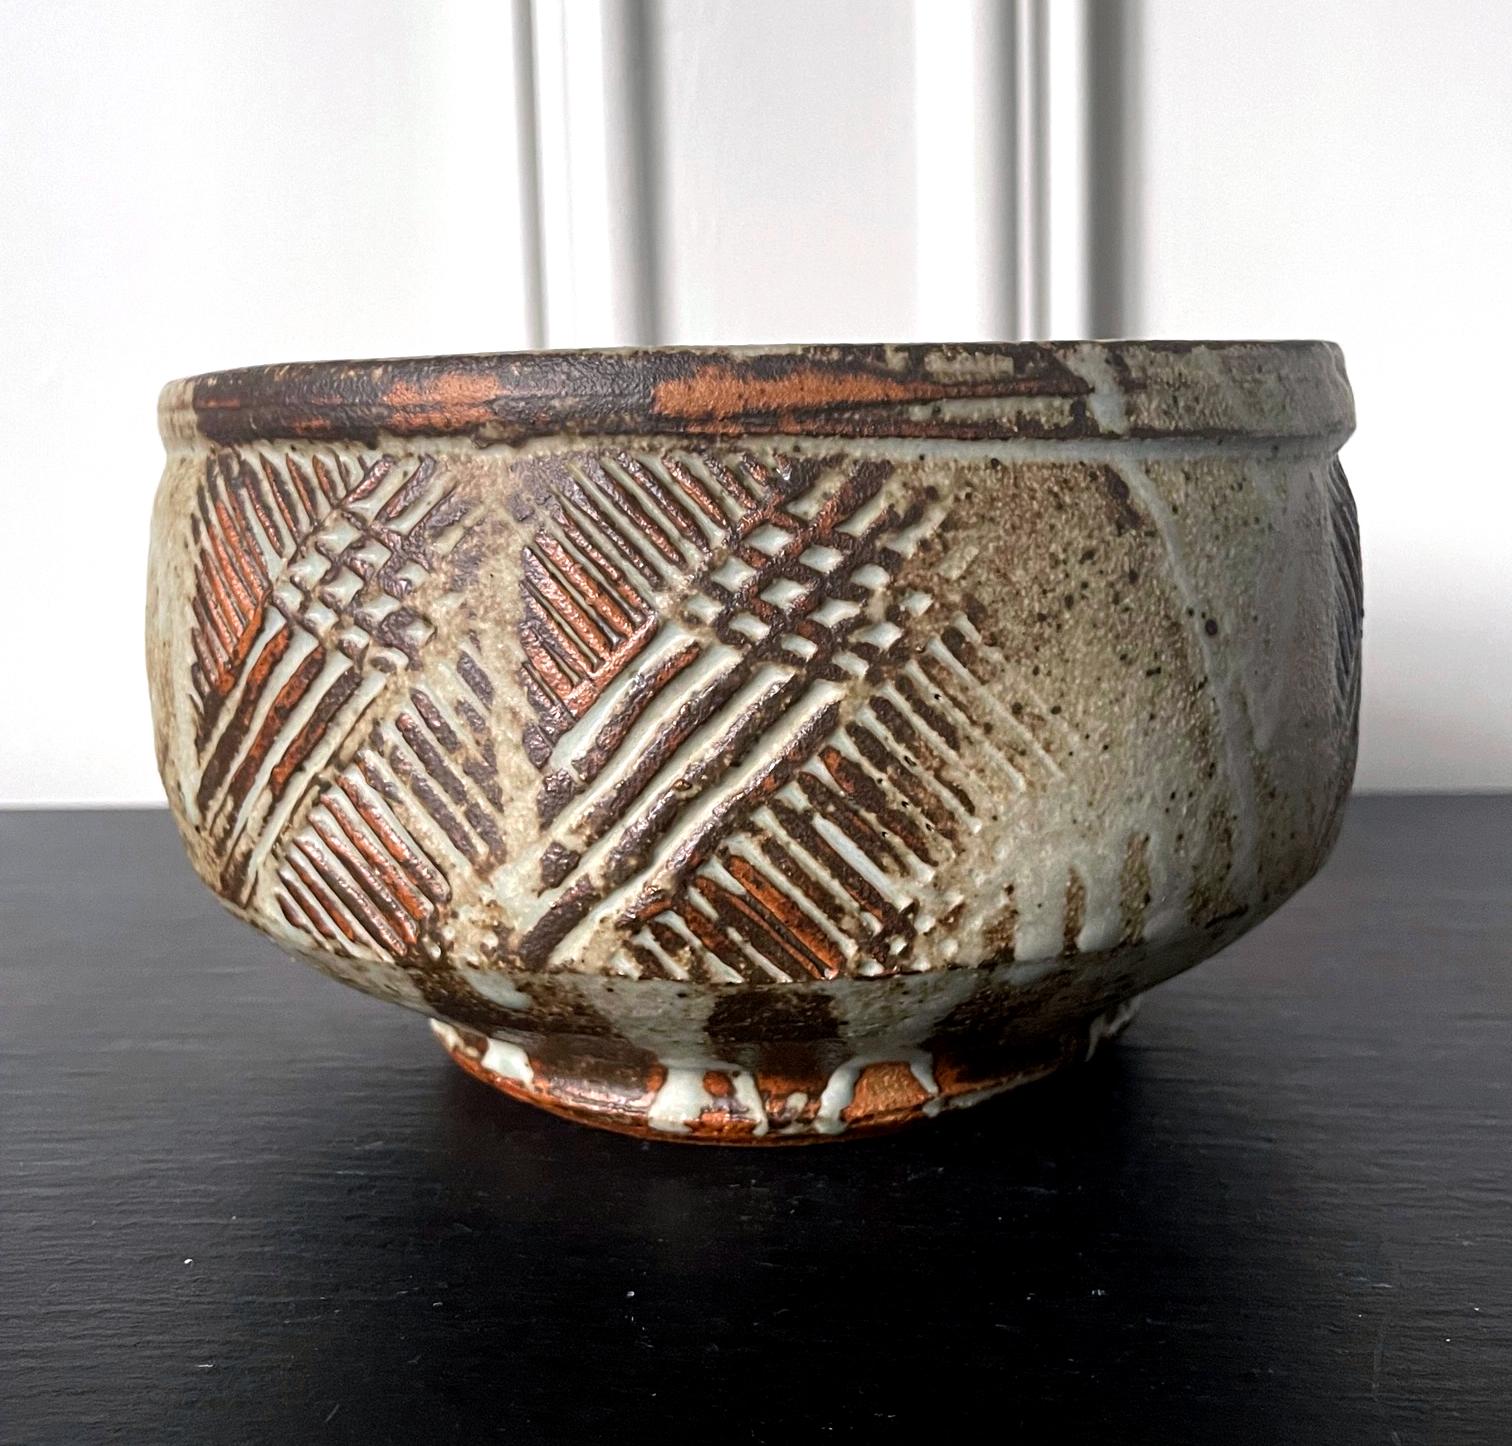 A stoneware center bowl by American ceramist Warren Mackenzie (1924-2018). Thickly potted in an alms bowl shape and supported by a short foot ring, the bowl has a robust and earthy appeal. The surface is craved with hatched lines that cross each